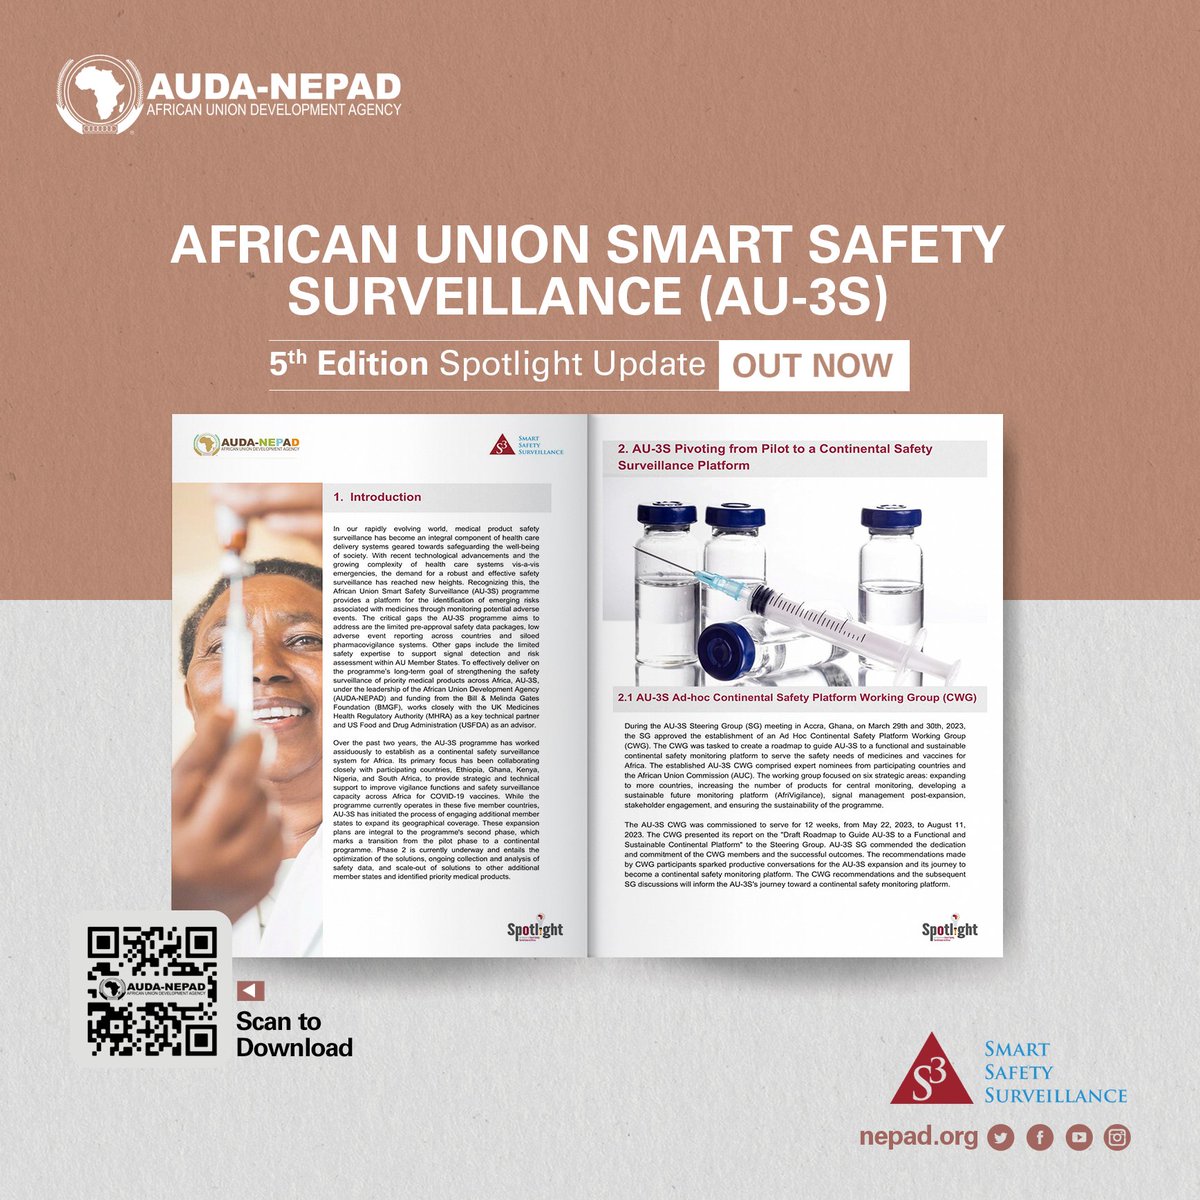 1 of 2: Exciting news! Introducing the 5th Edition of the African Union Smart Safety Surveillance #AU3S Programme Spotlight Update! Discover the latest dynamic developments and initiatives undertaken by the programme. #ByAfrica4Africa #Agenda2063